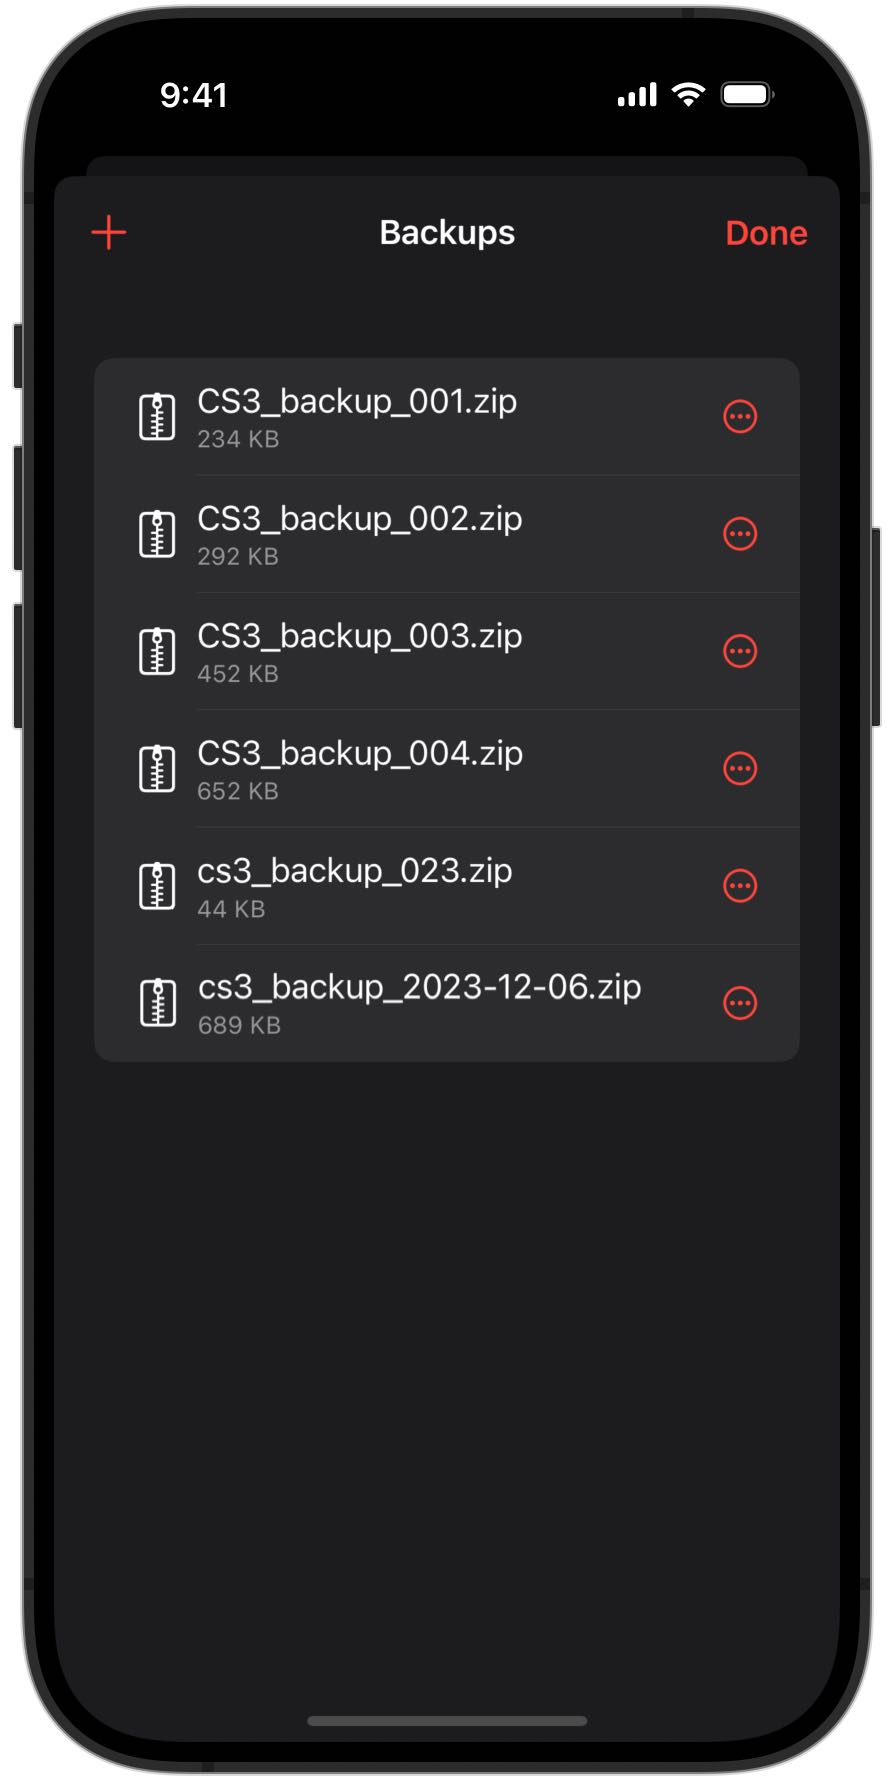 Screenshot of an iPhone showing the backup overview in RailControl Pro